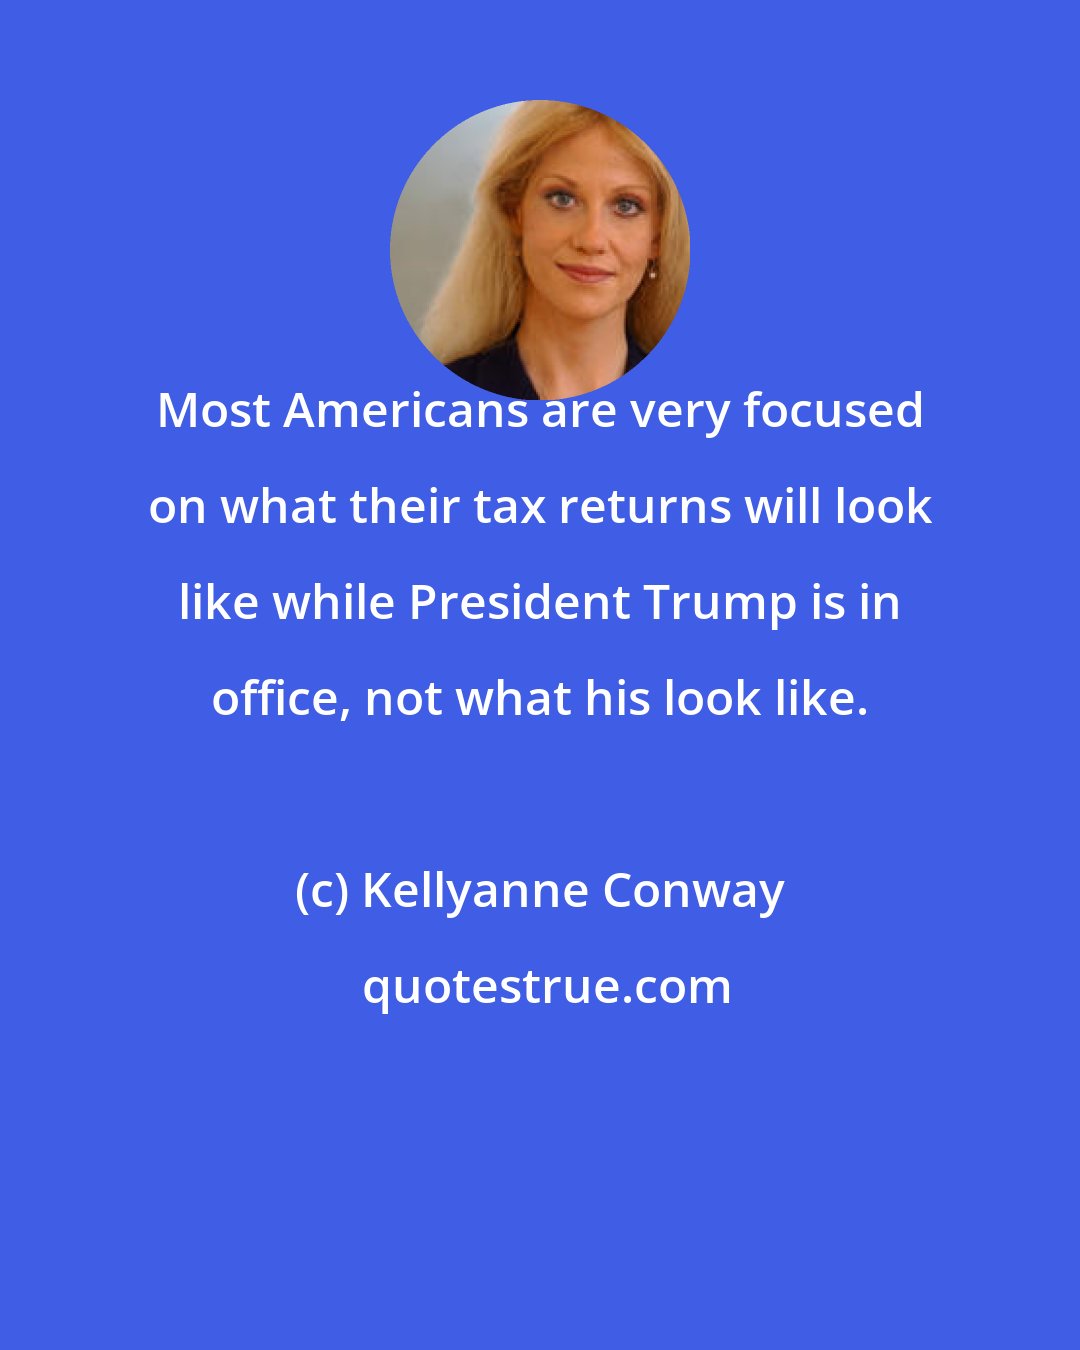 Kellyanne Conway: Most Americans are very focused on what their tax returns will look like while President Trump is in office, not what his look like.